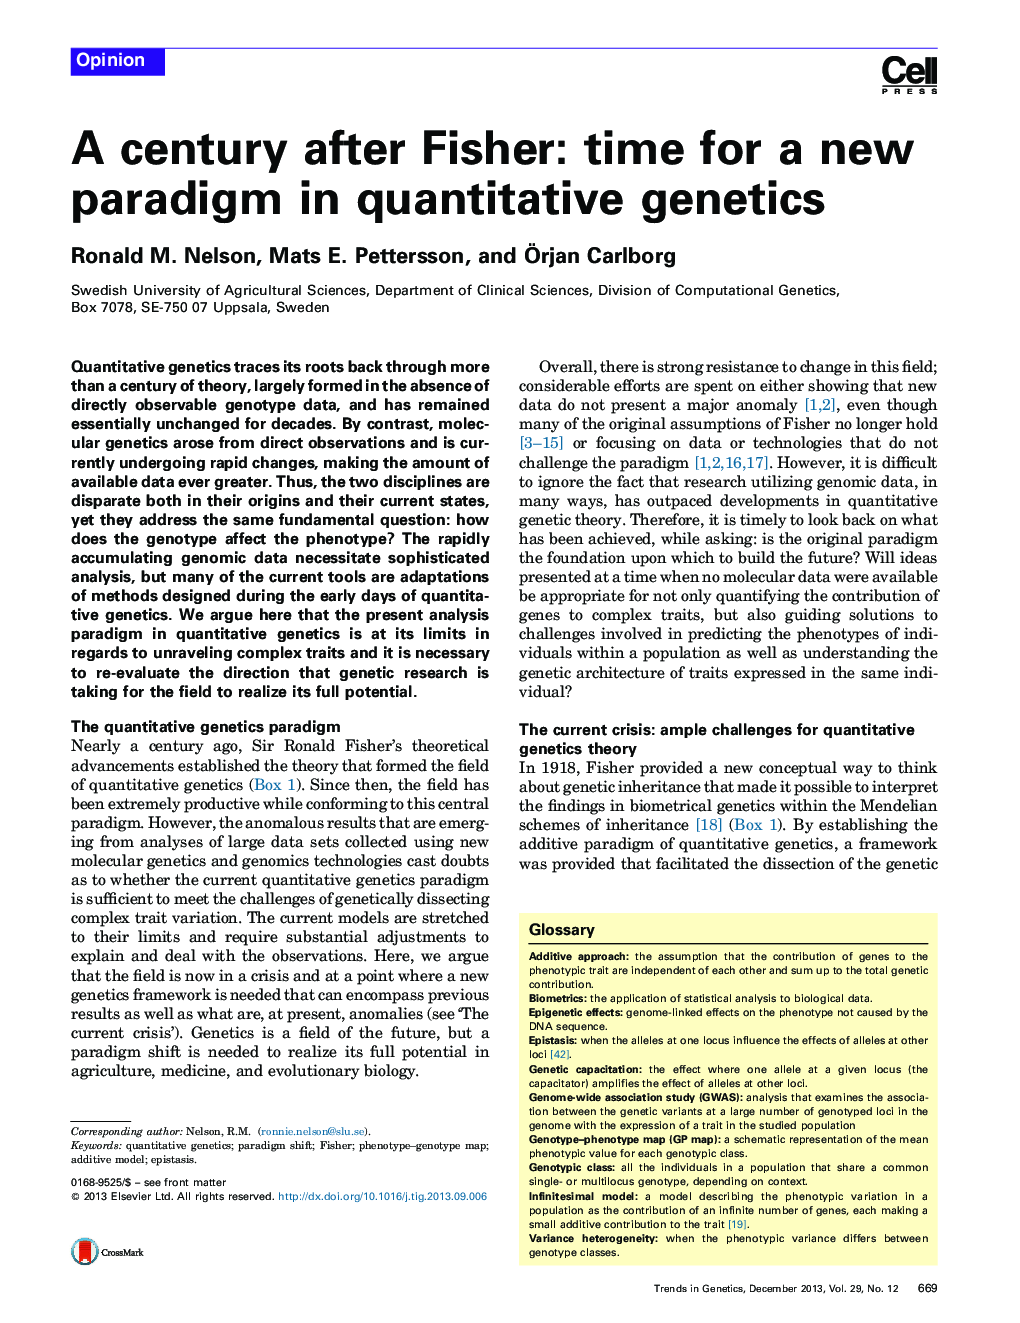 A century after Fisher: time for a new paradigm in quantitative genetics